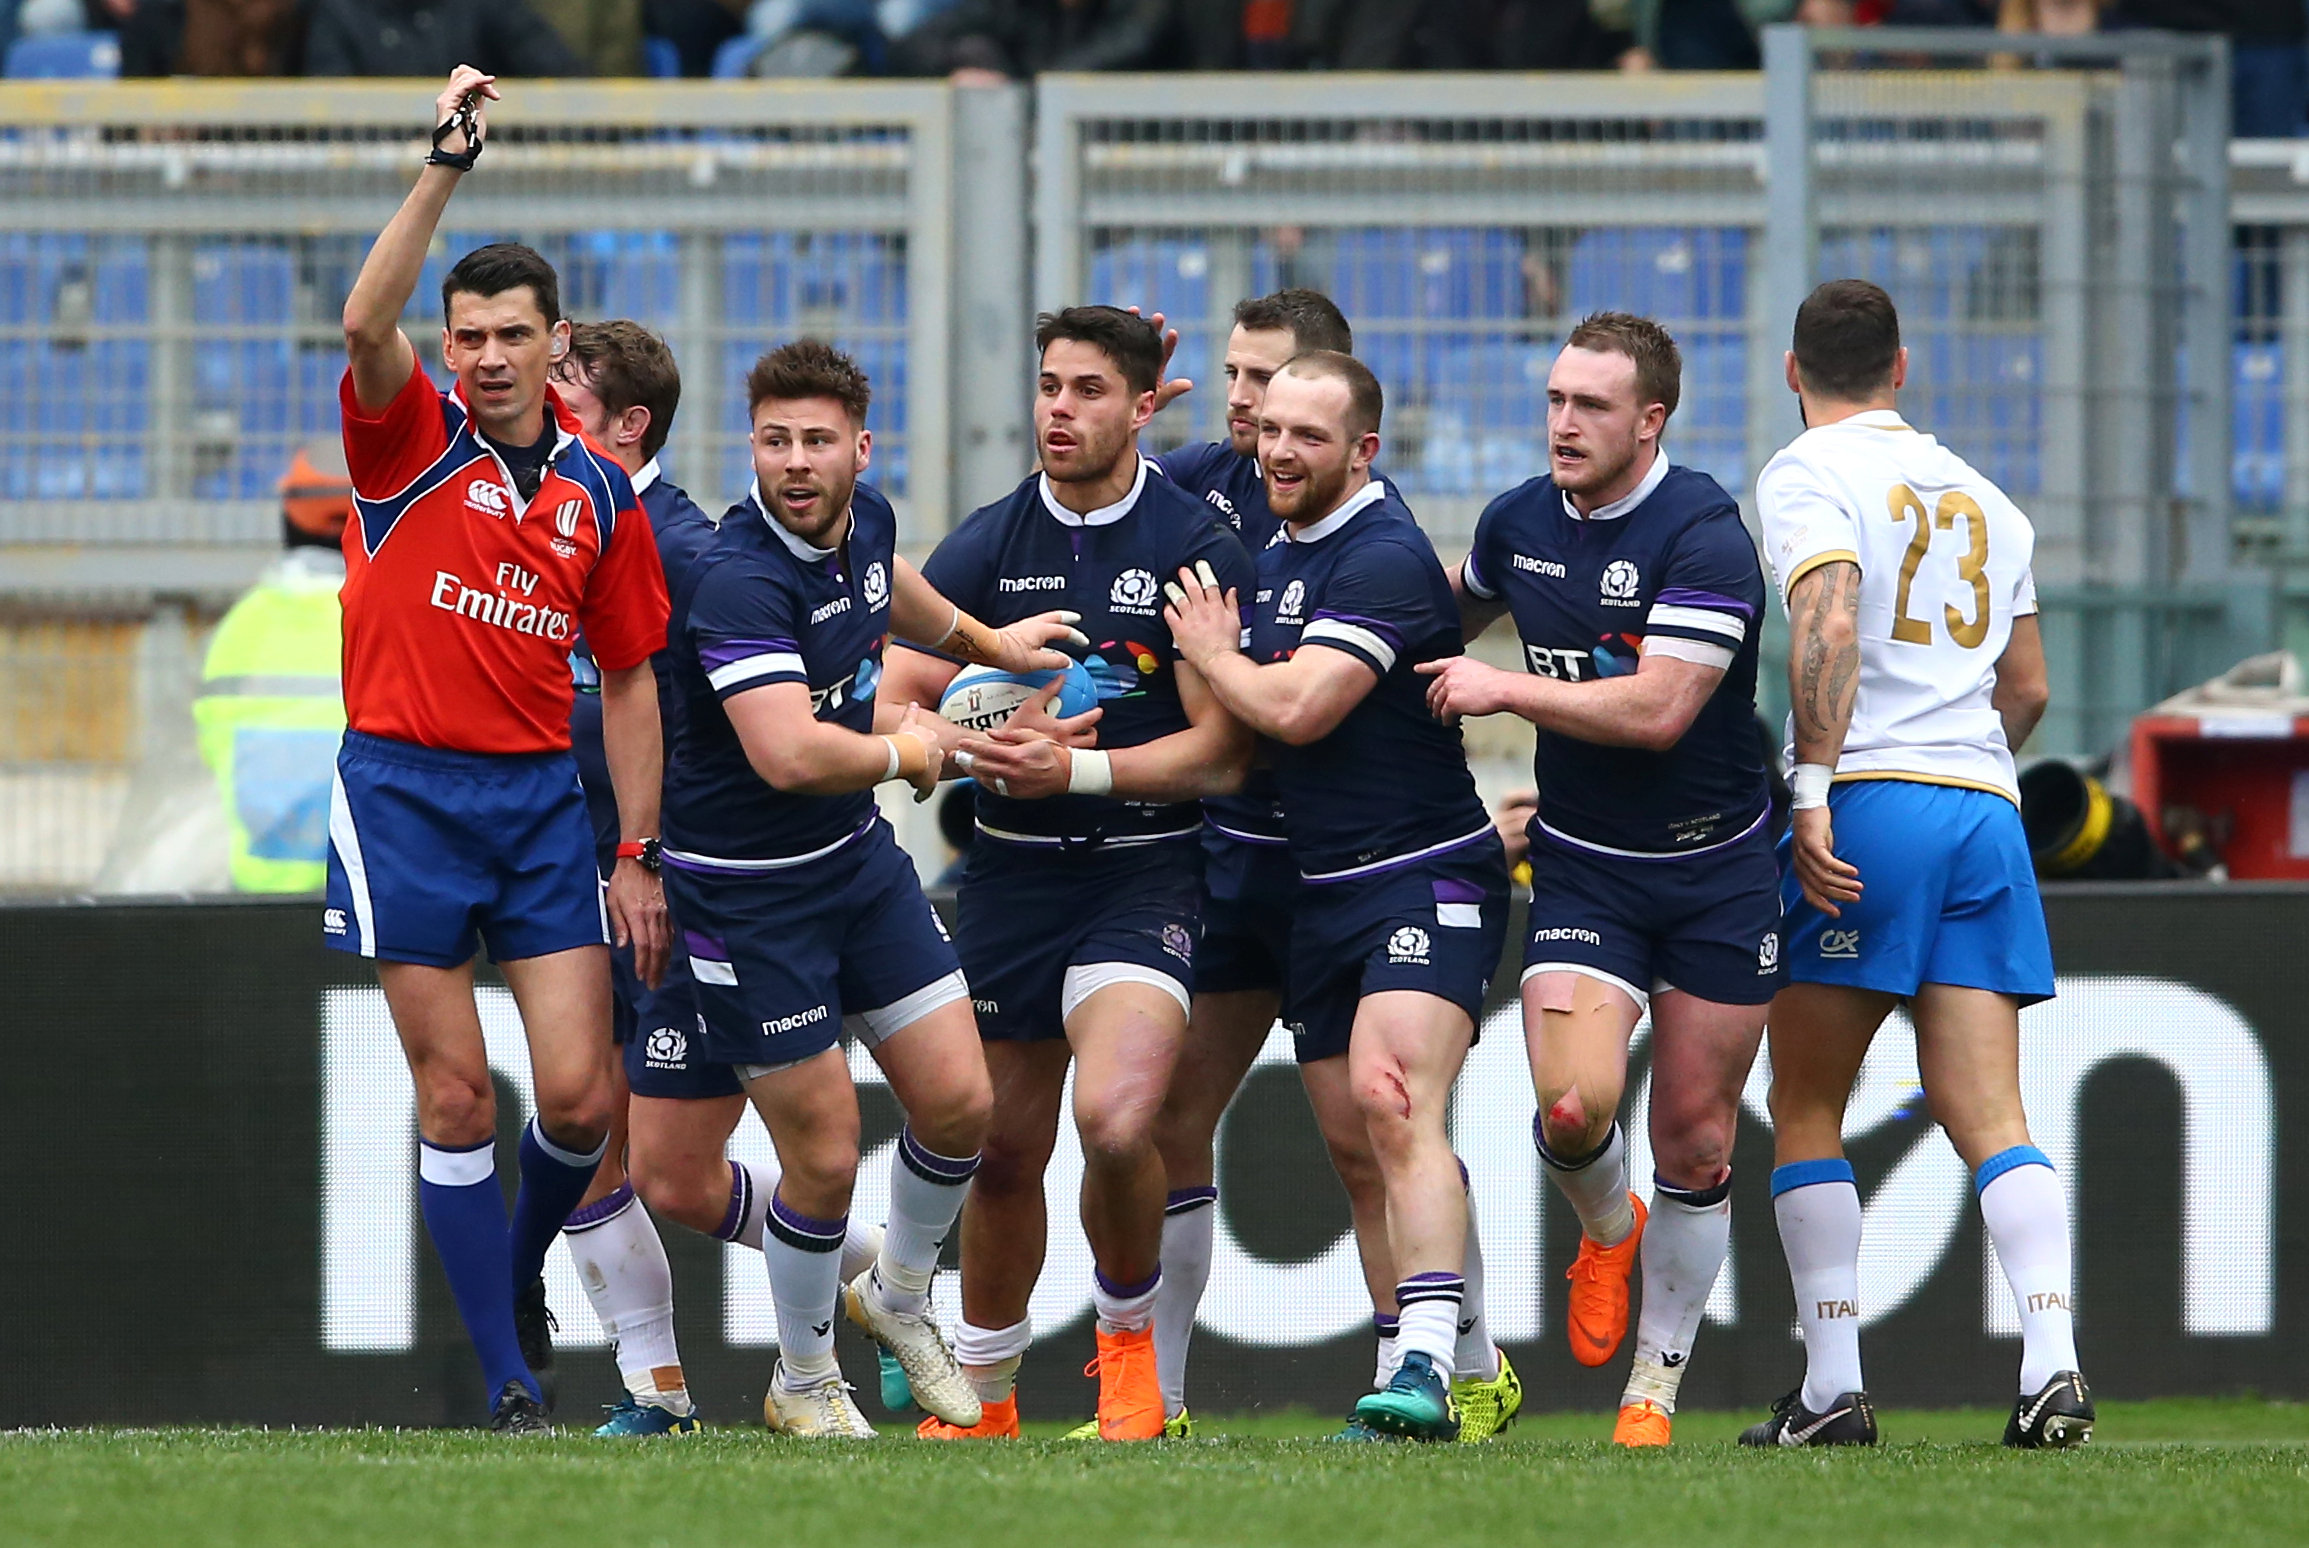 Rugby: Scotland survive scare to edge Italy in Six Nations